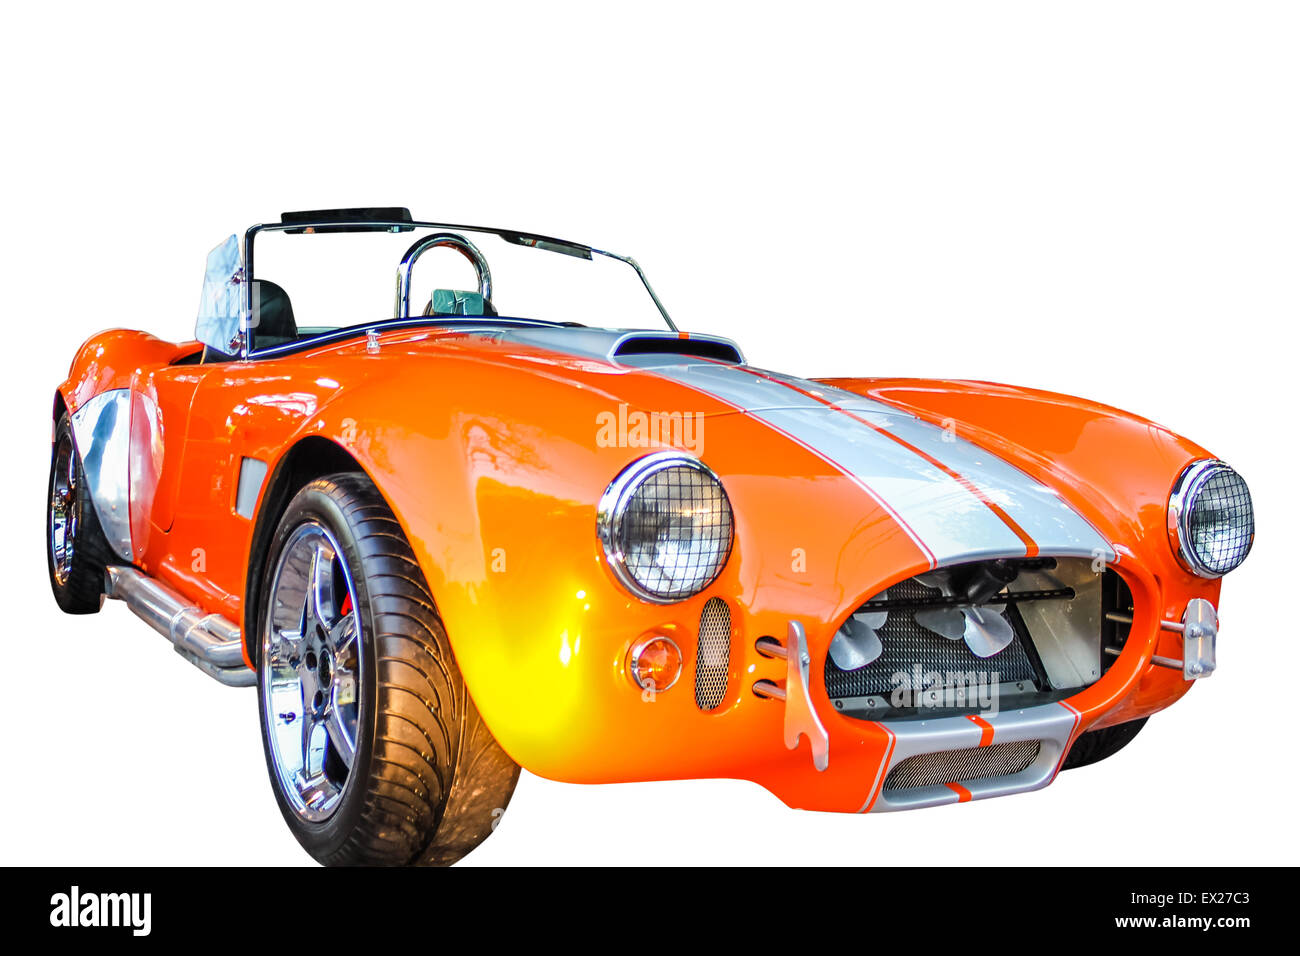 The AC Cobra, sold as the Ford Shelby AC Cobra 427 in the United States on white background. Stock Photo